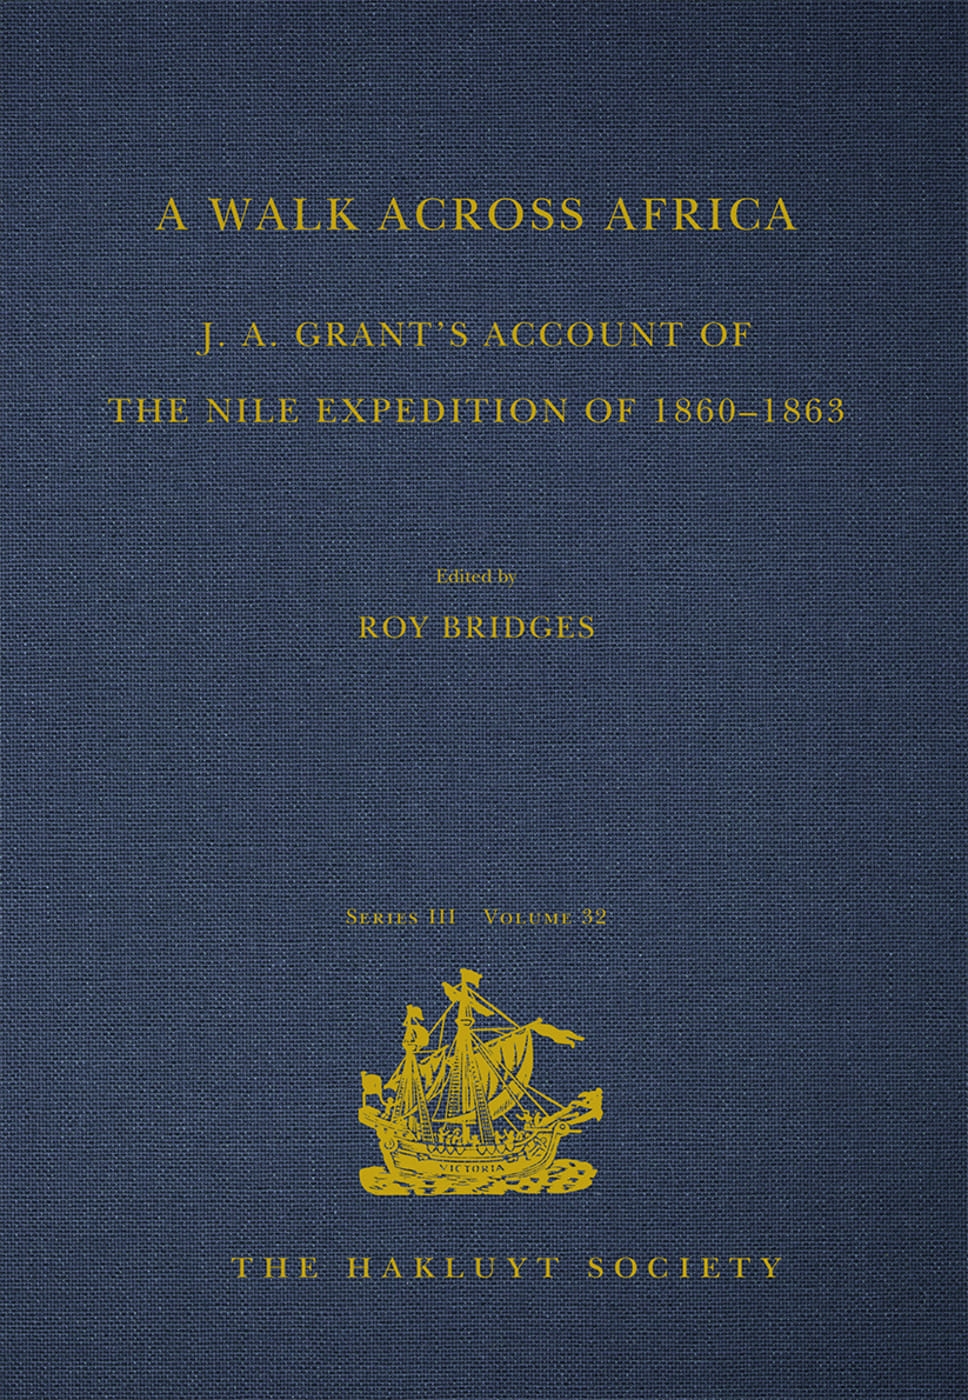 A Walk Across Africa: J. A. Grant’s Account of the Nile Expedition of 1860-1863